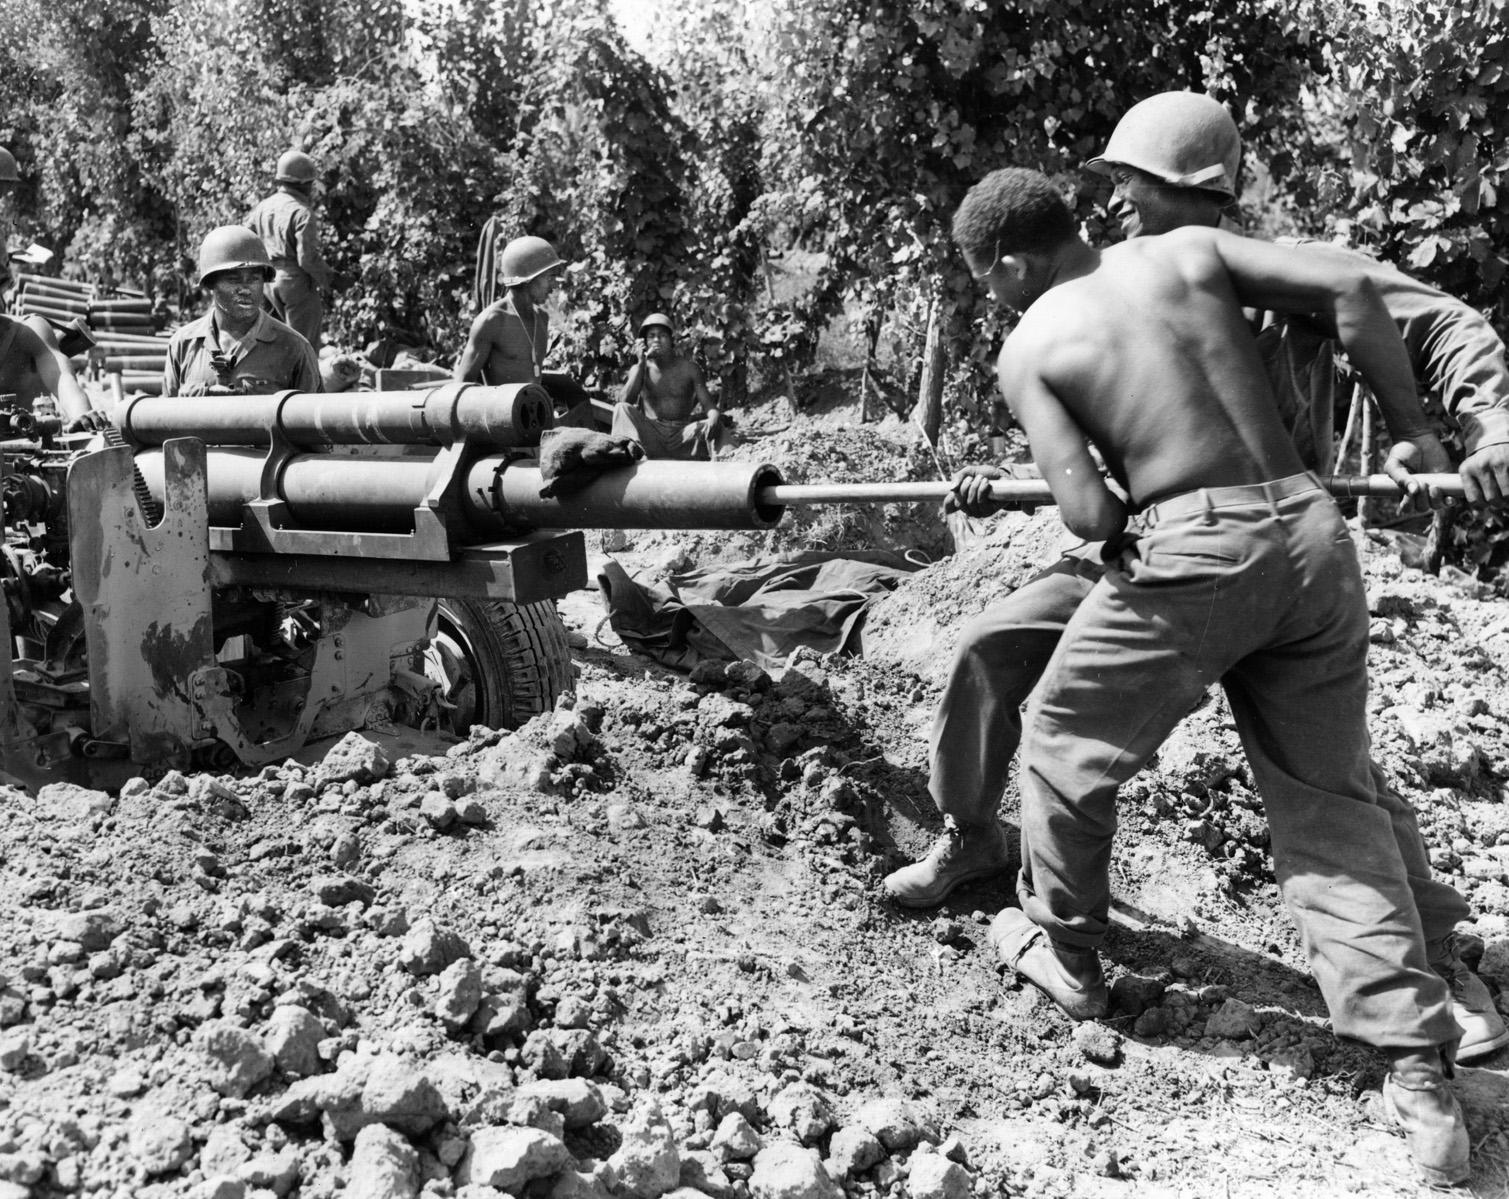 In action on the banks of the Arno River on September 1, 1944, the crew of a 105mm howitzer of Battery B, 598th Field Artillery, services its weapon. The 598th was a component of the 92nd Infantry Division.